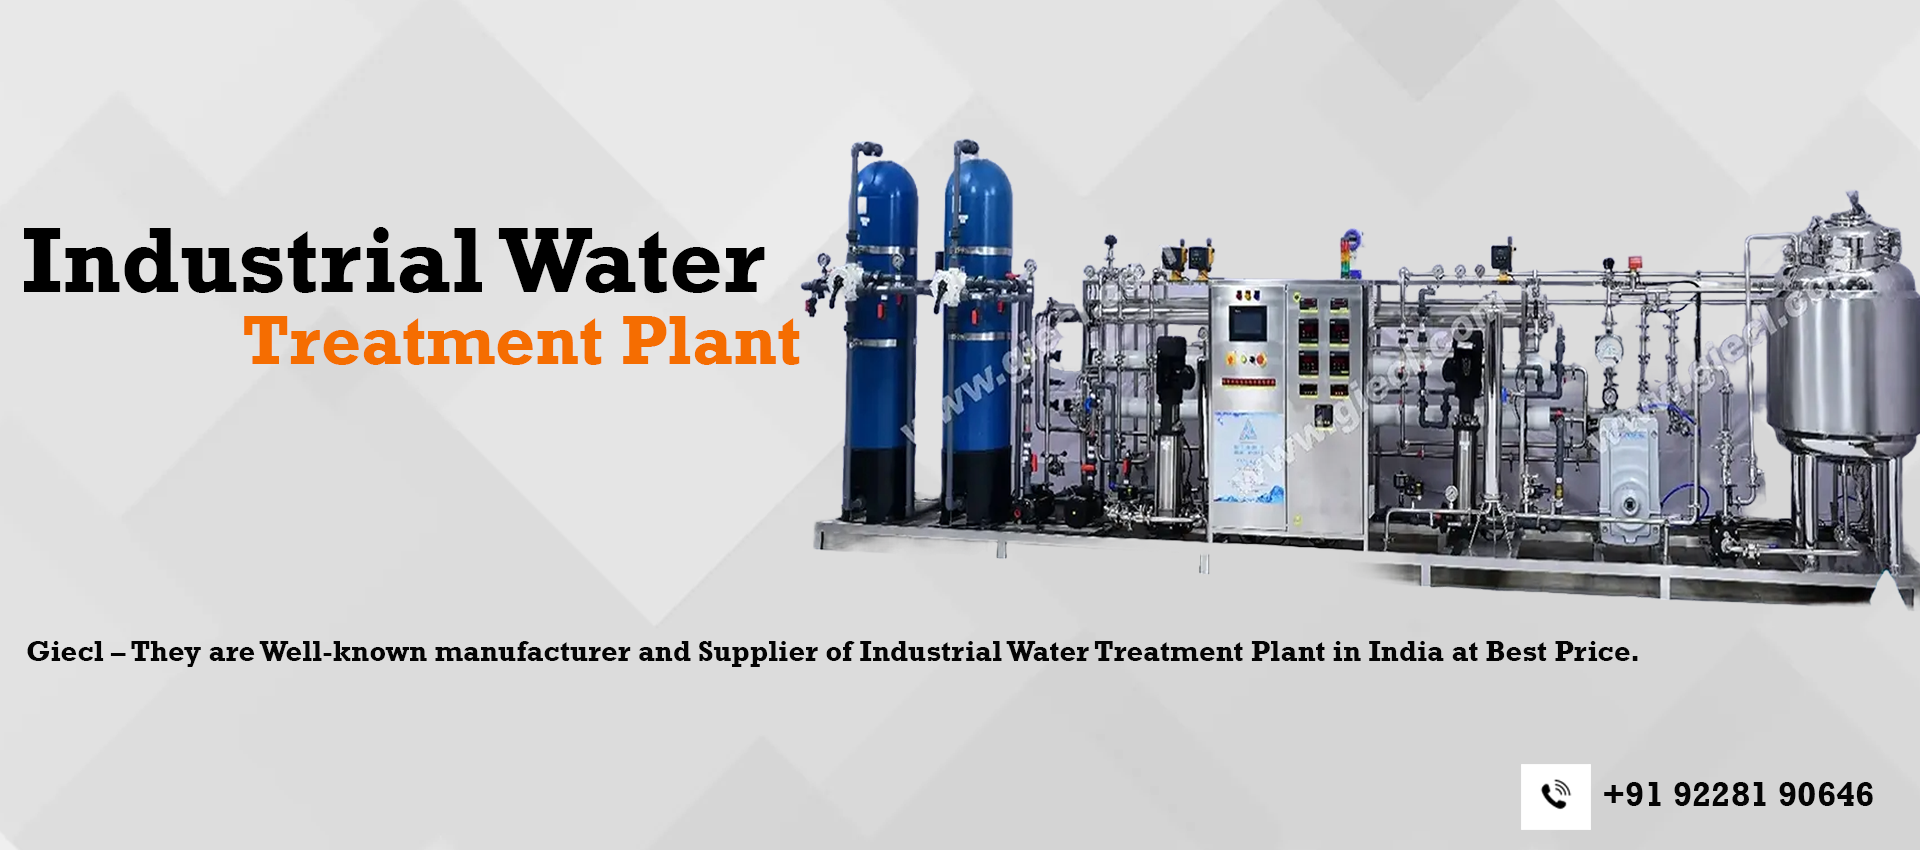 Industrial Water Treatment Plant Exporter